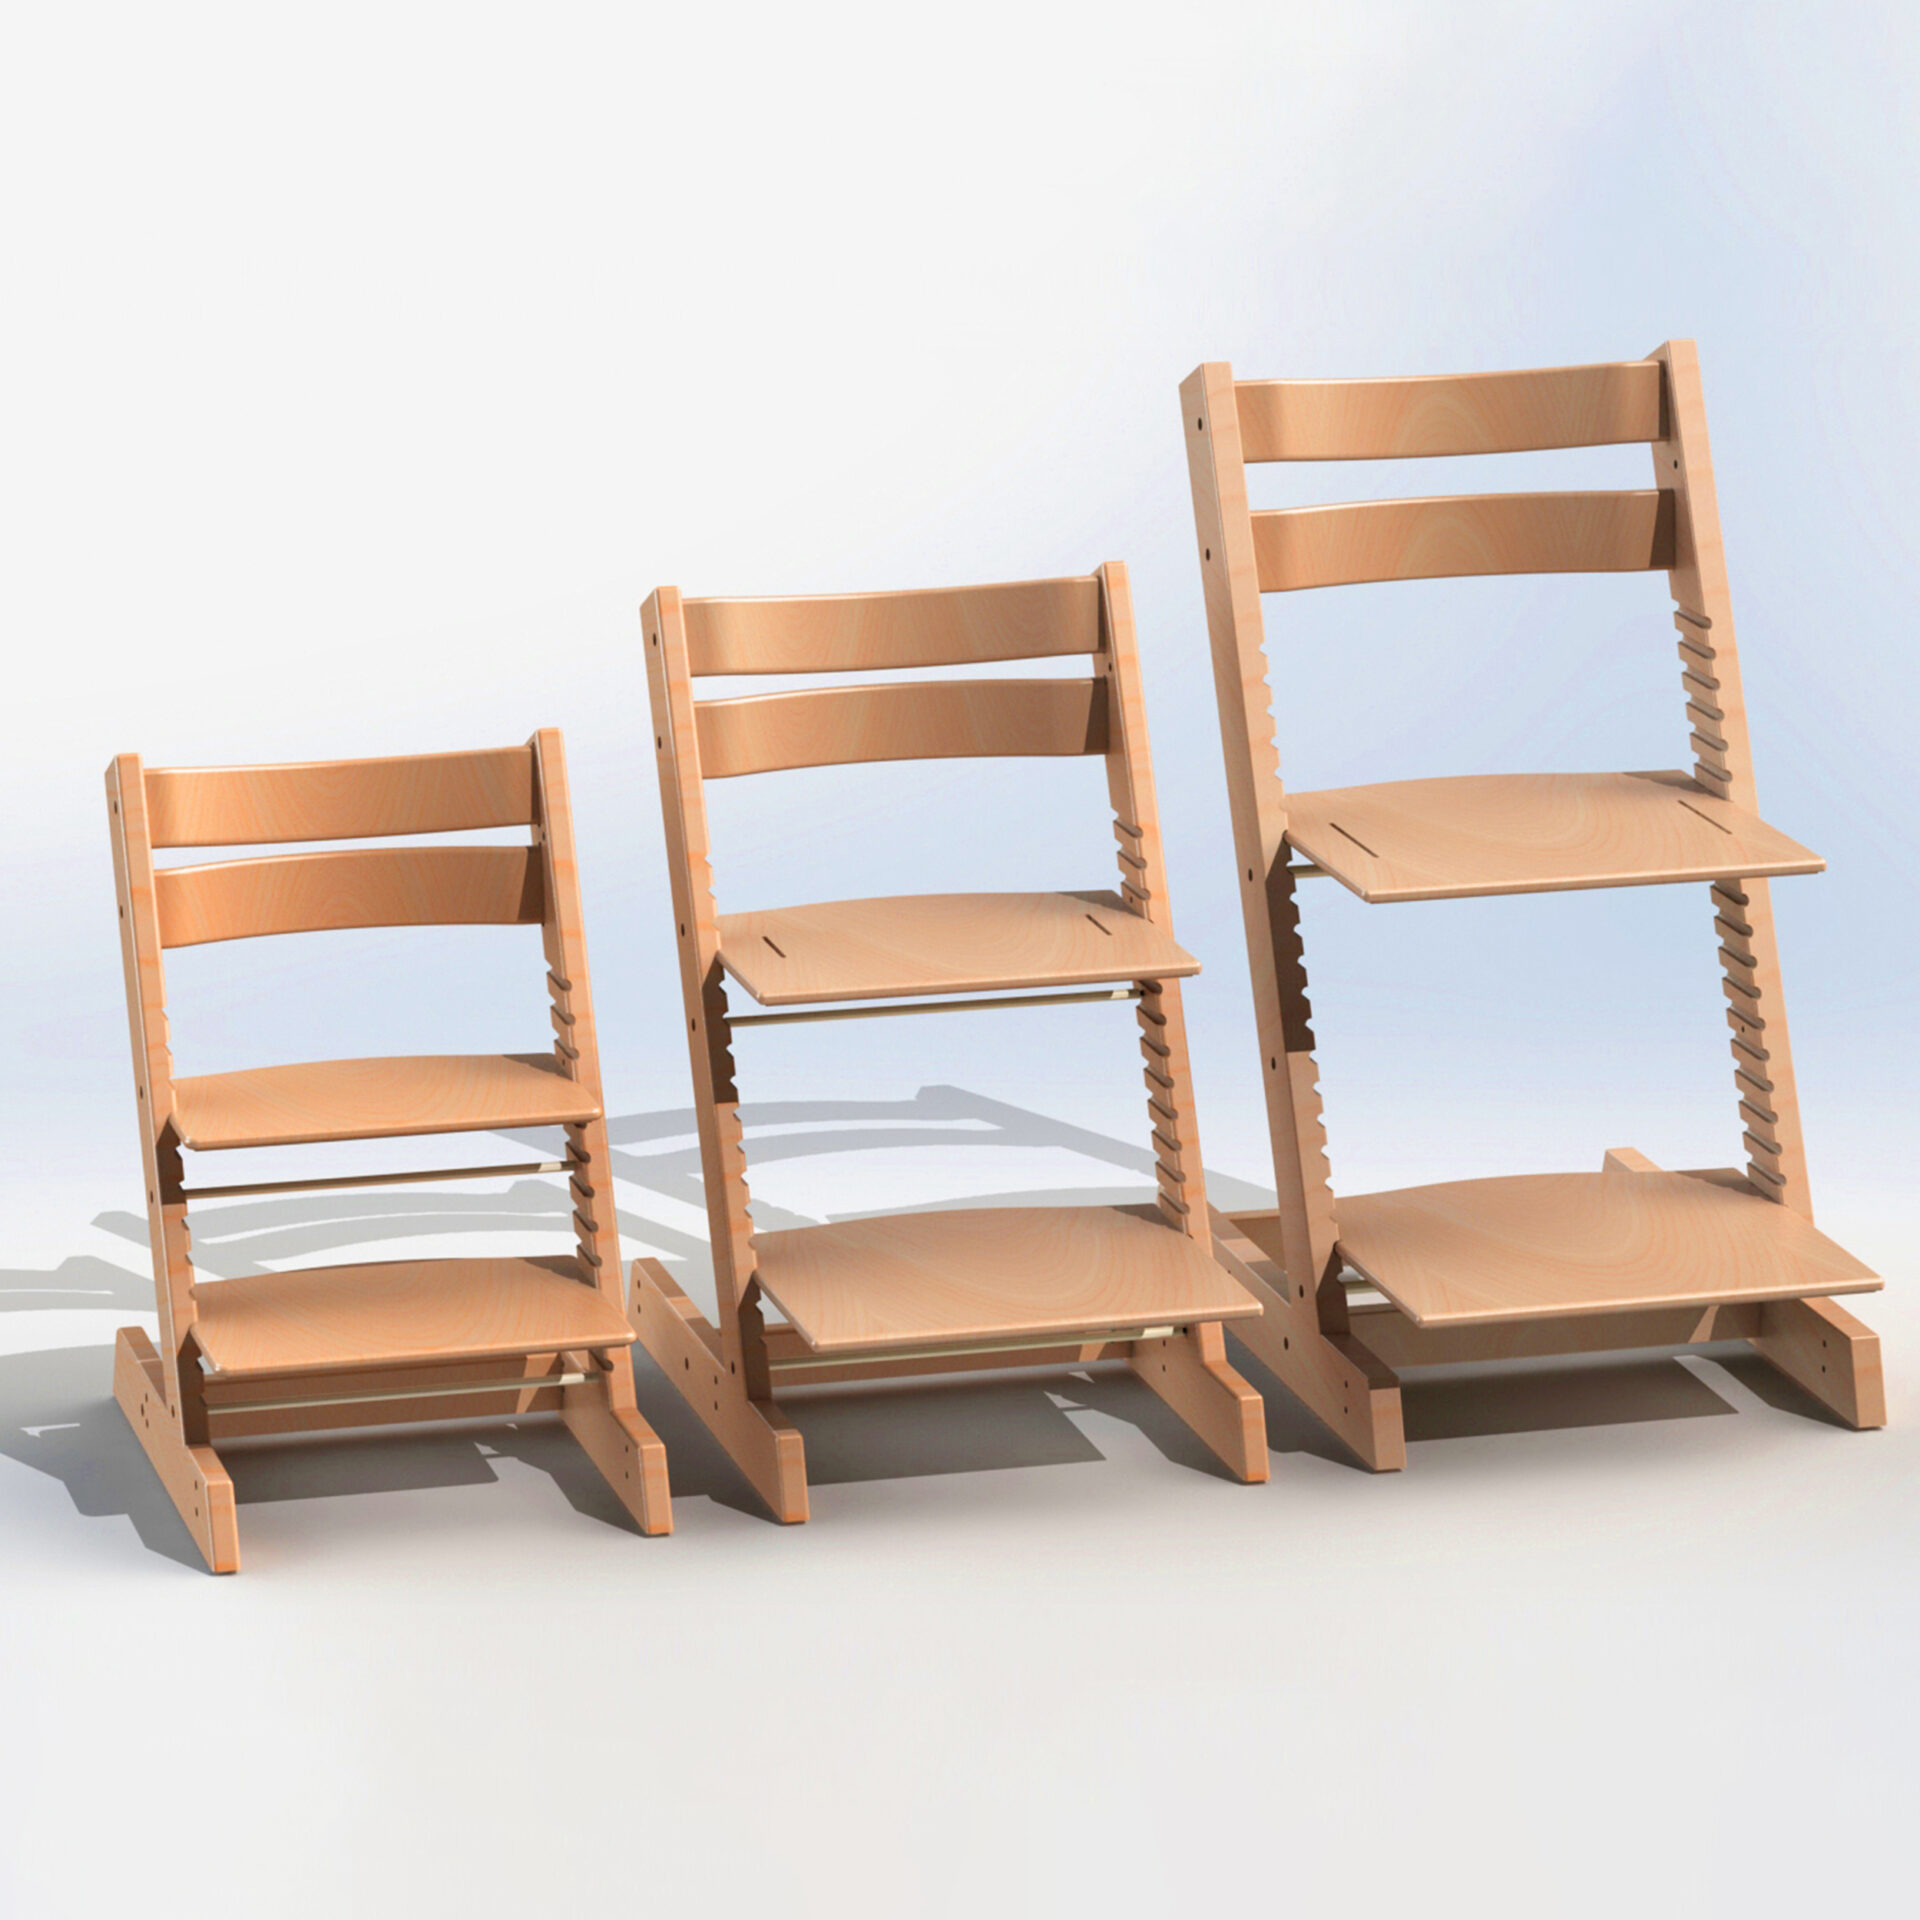 3 sizes of paediatric high chair